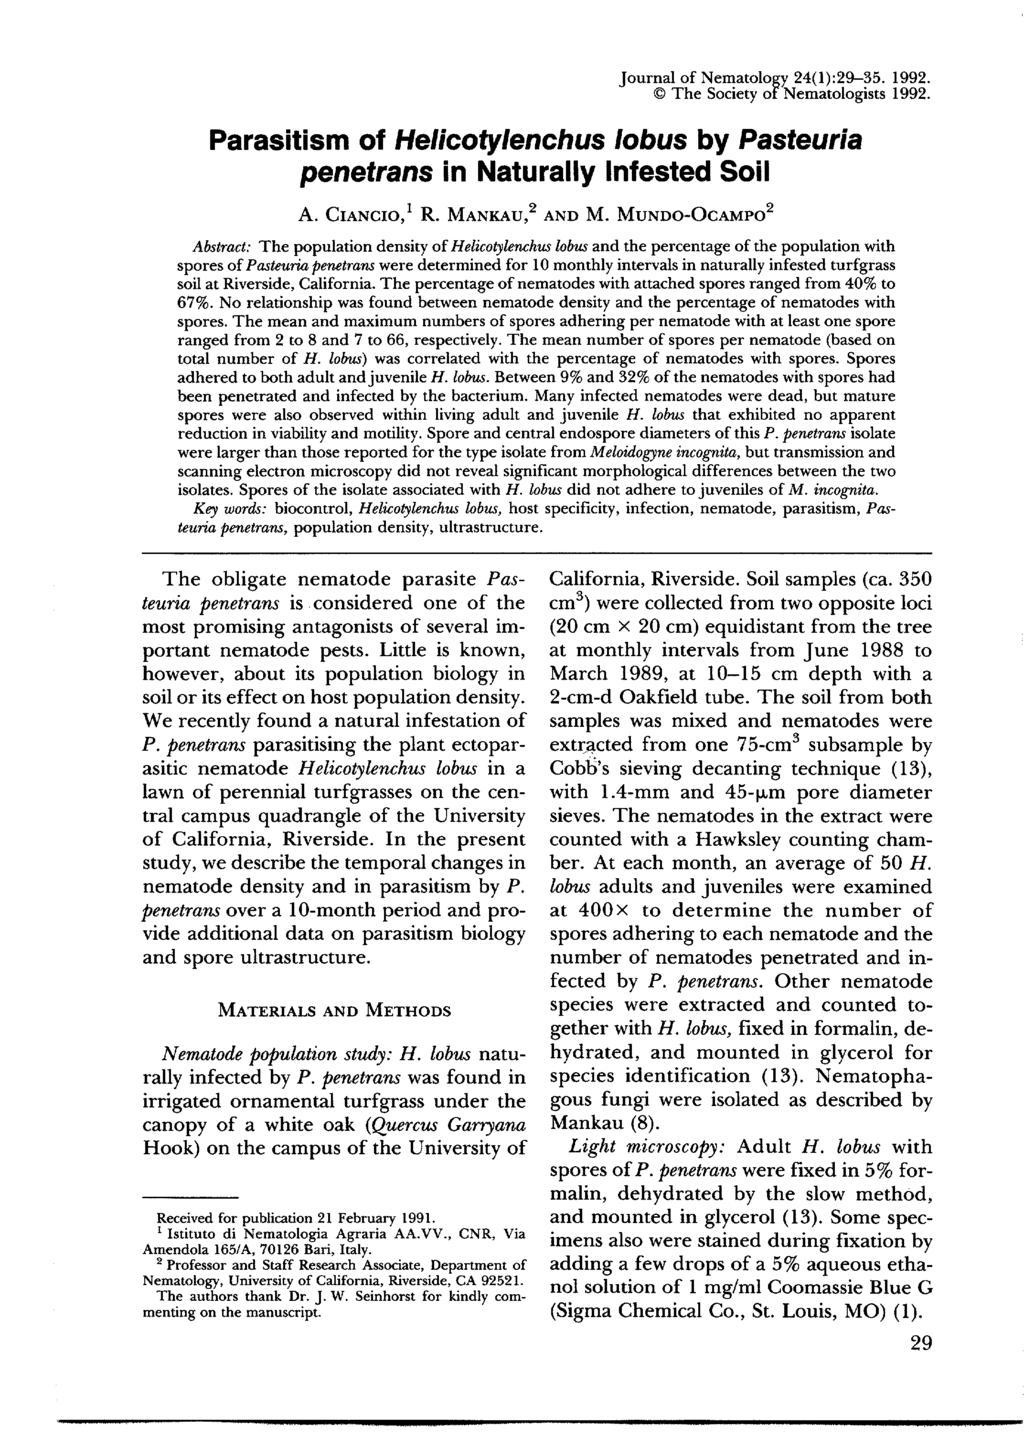 Journal of Nematology 24(1):29-35. 1992. The Society of Nematologists 1992. Parasitism of Helicotylenchus Iobus by Pasteuria penetrans in Naturally Infested Soil A. CIANCIO, 1 R. MANKAU, 2 AND M.